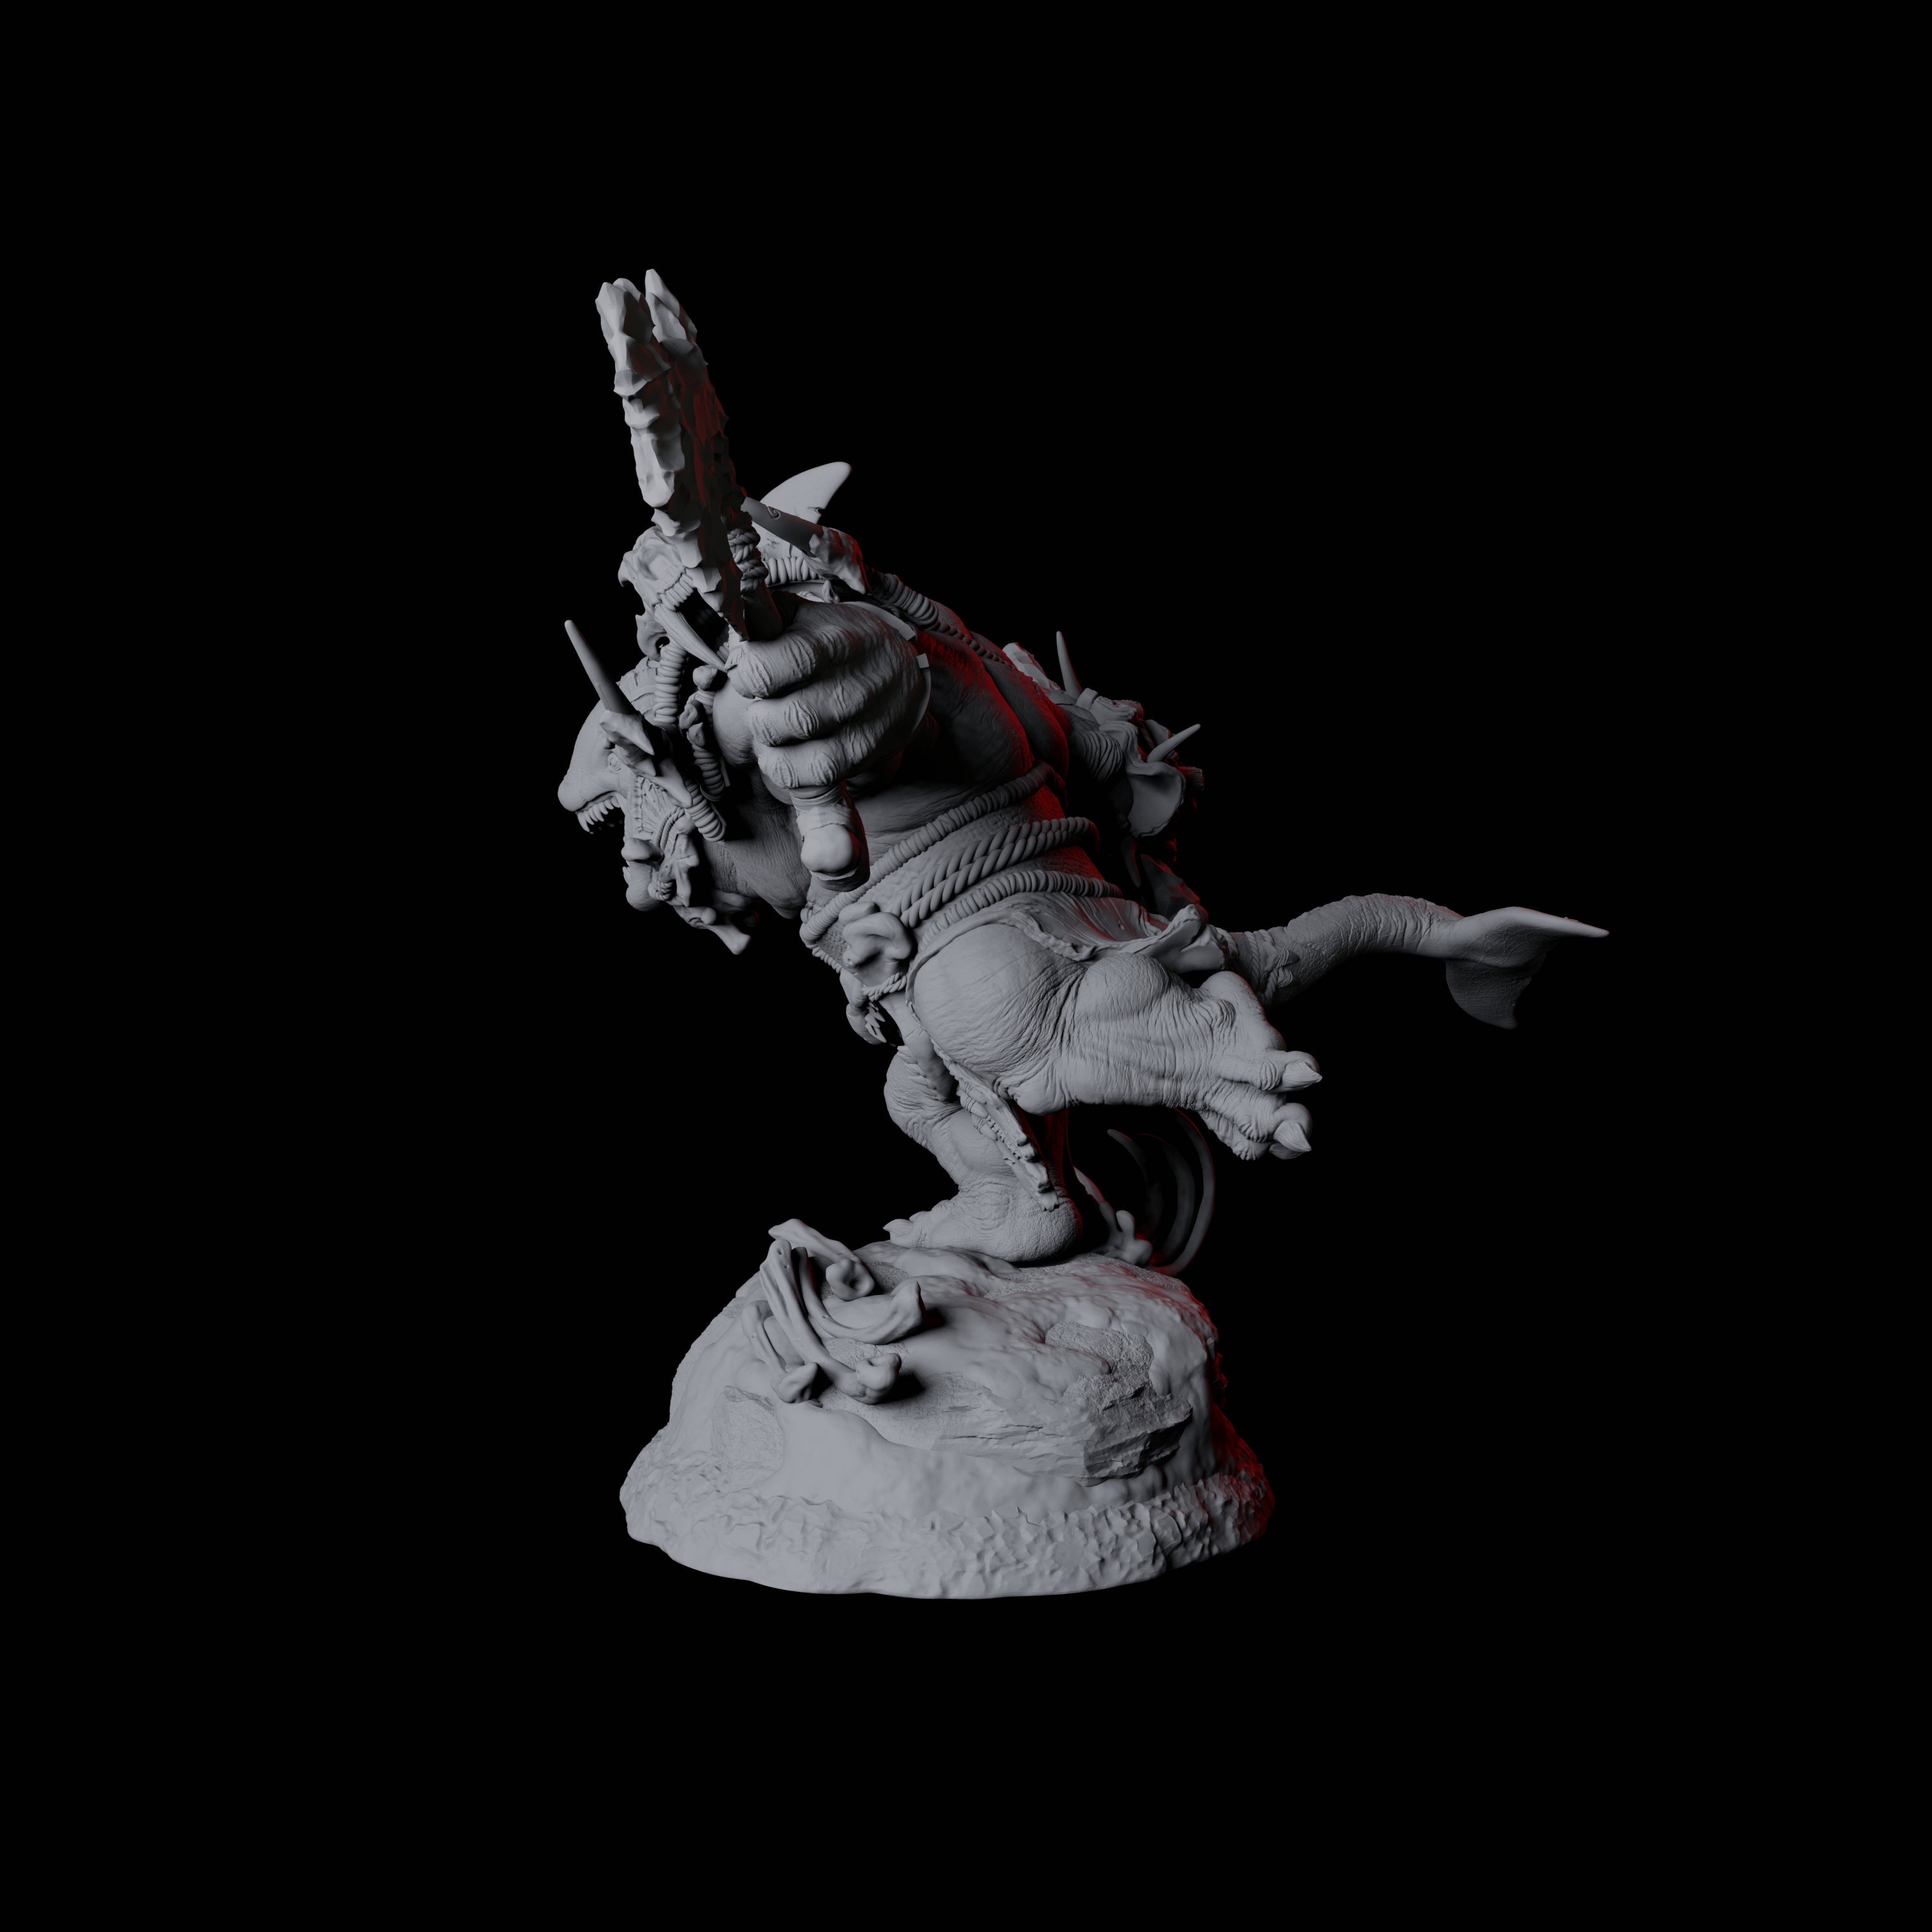 Graceful Orcafolk Warrior A Miniature for Dungeons and Dragons, Pathfinder or other TTRPGs